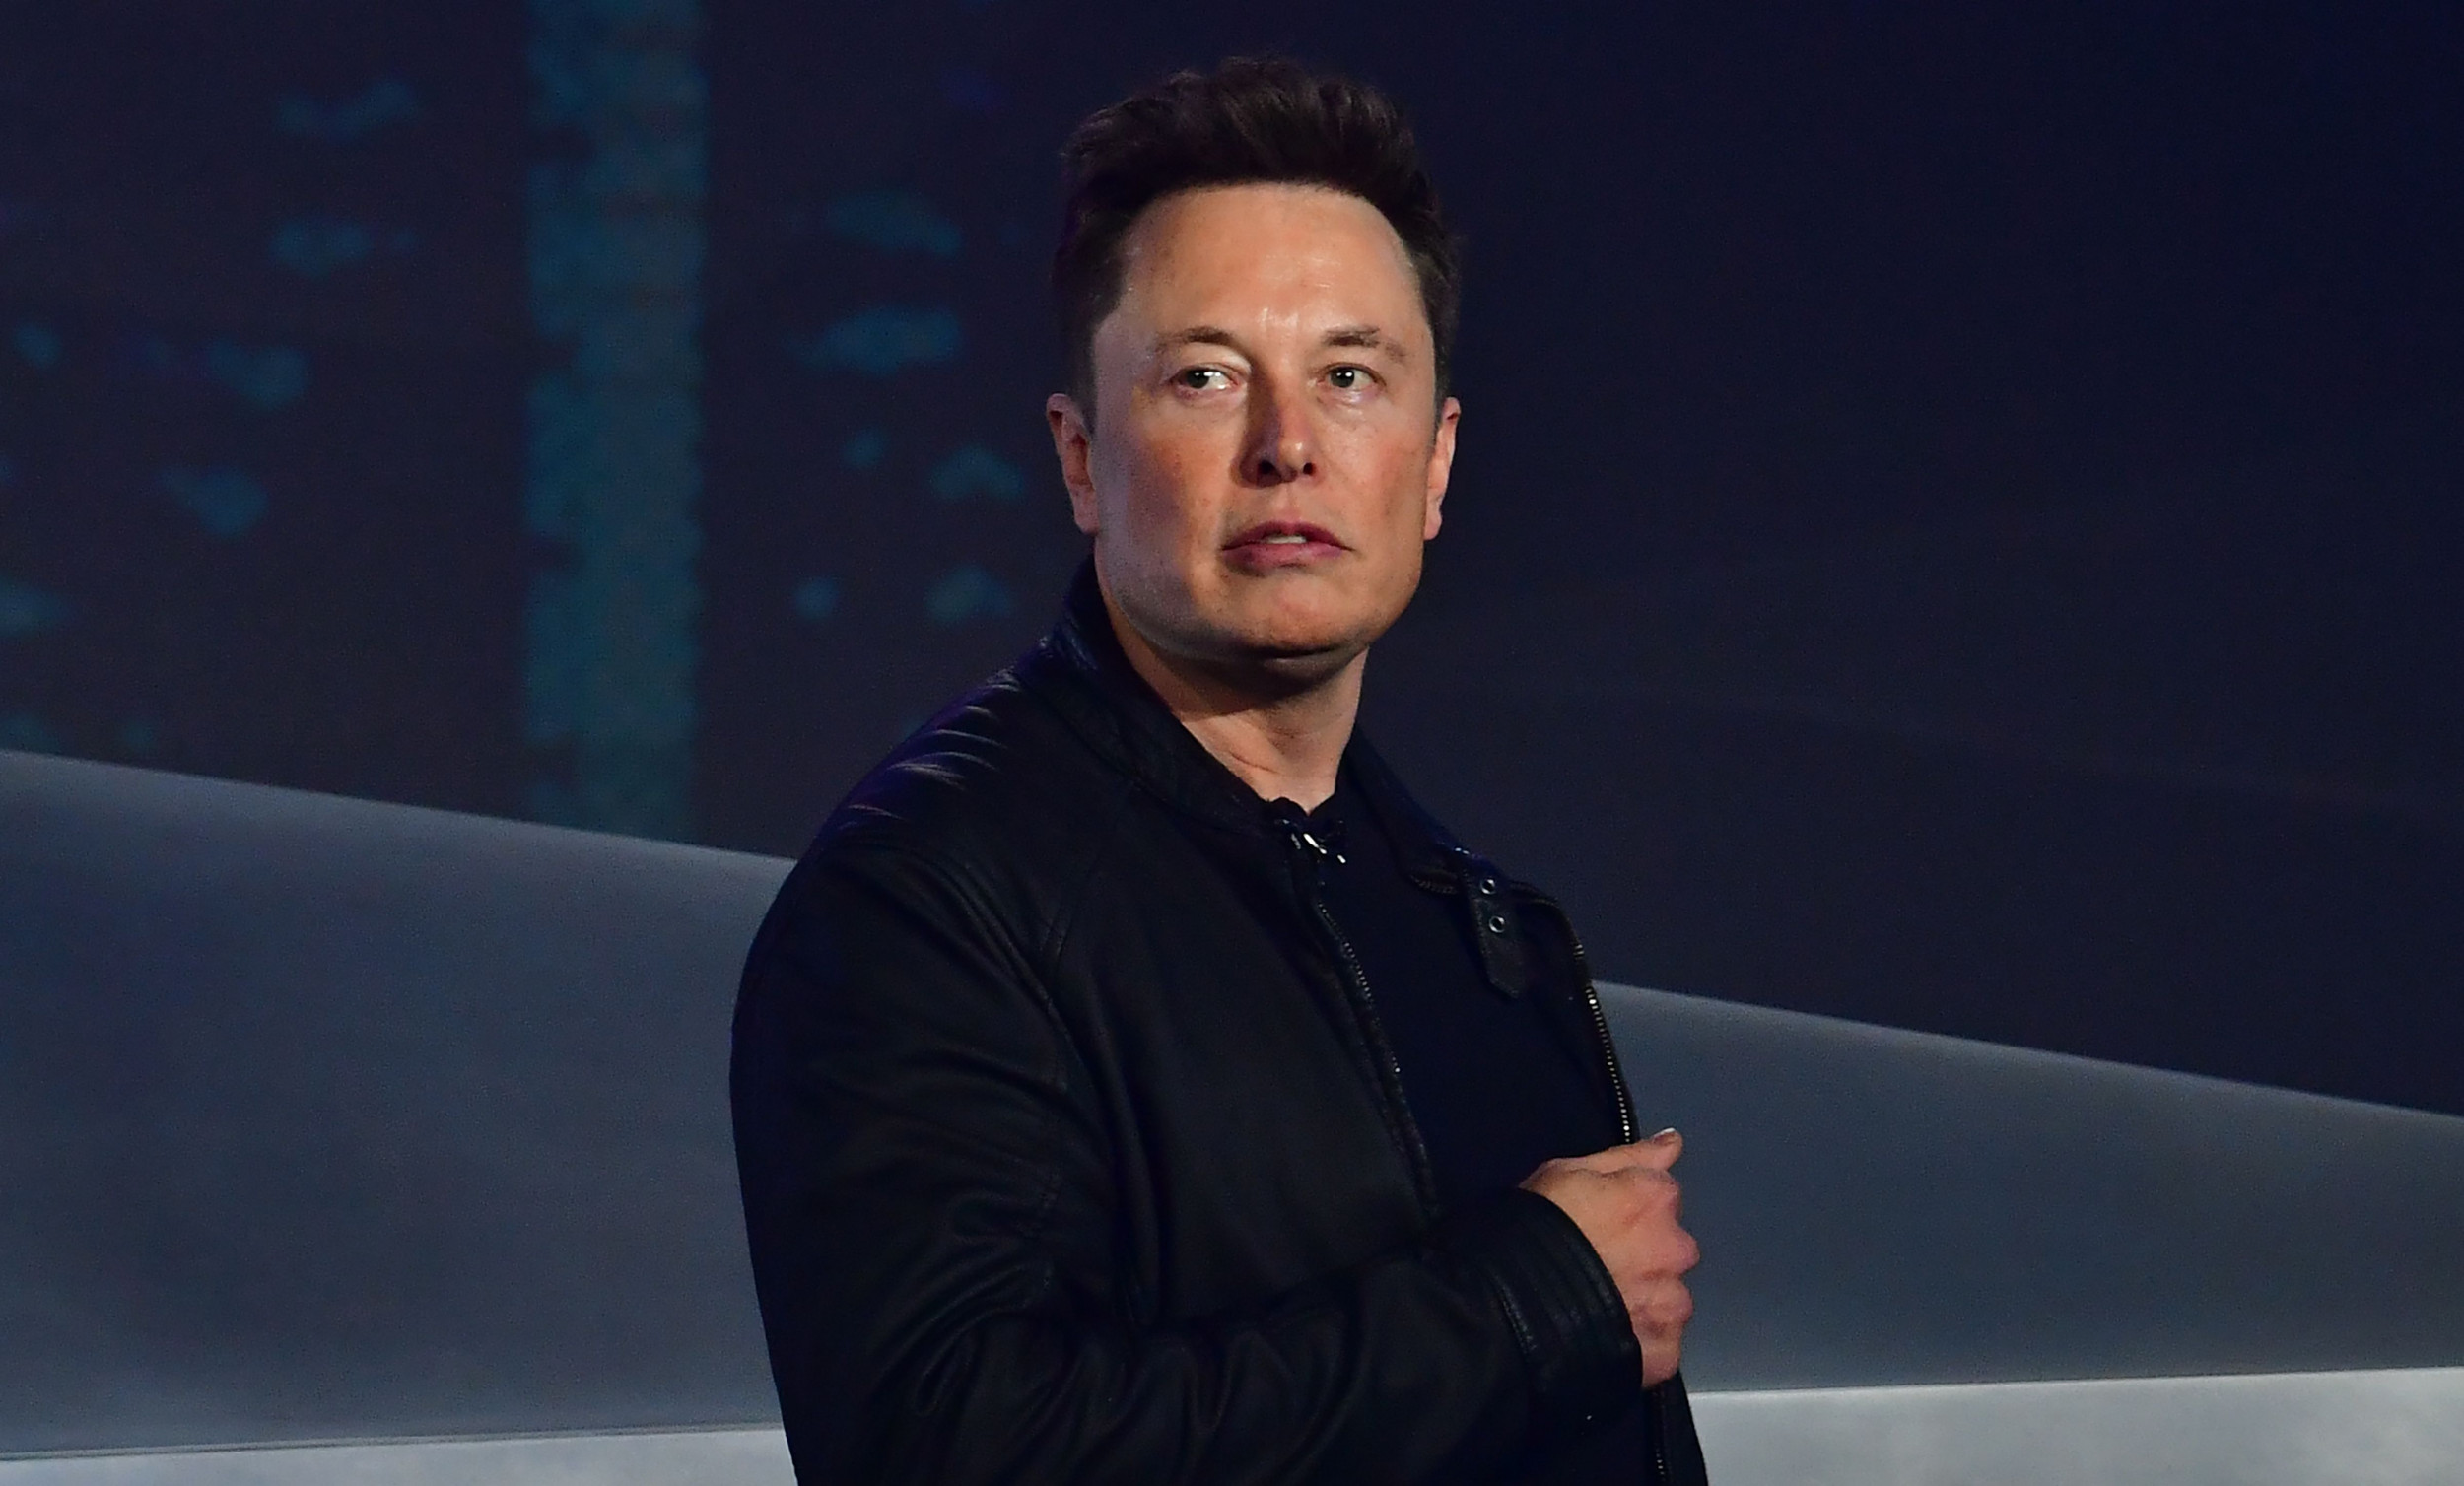 Elon Musk Offers Challenge To Sexual Harassment Accusers 1598